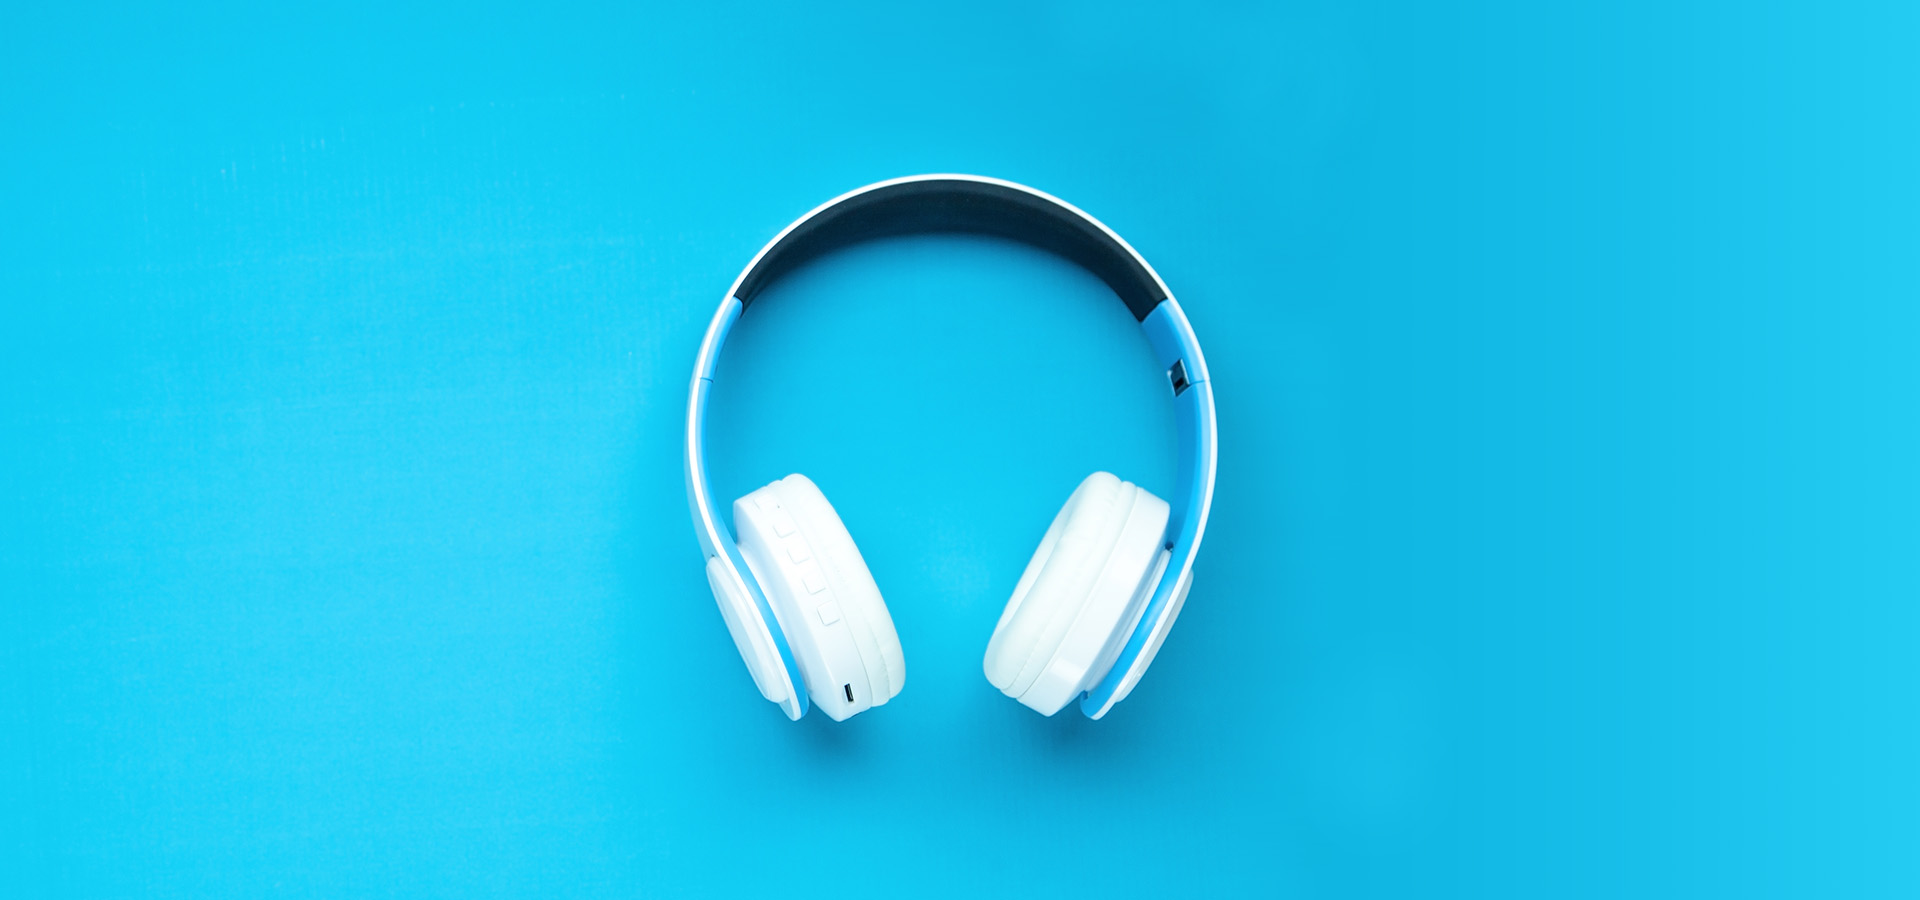 White headphones on a blue background.